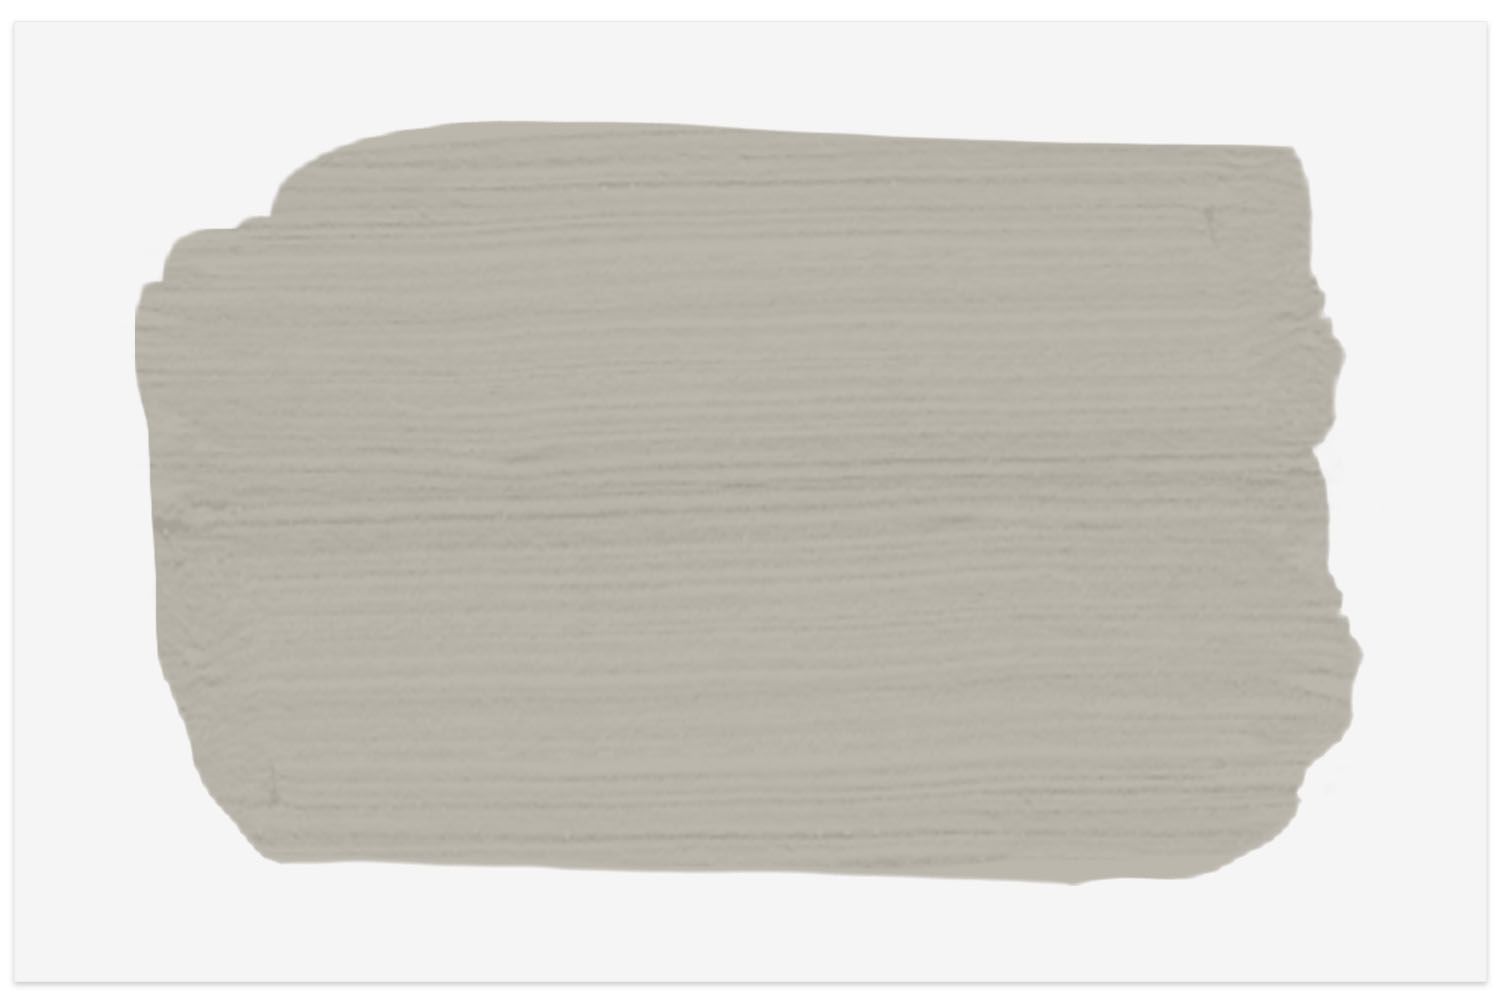 Sherwin-Williams Mindful Gray paint swatch